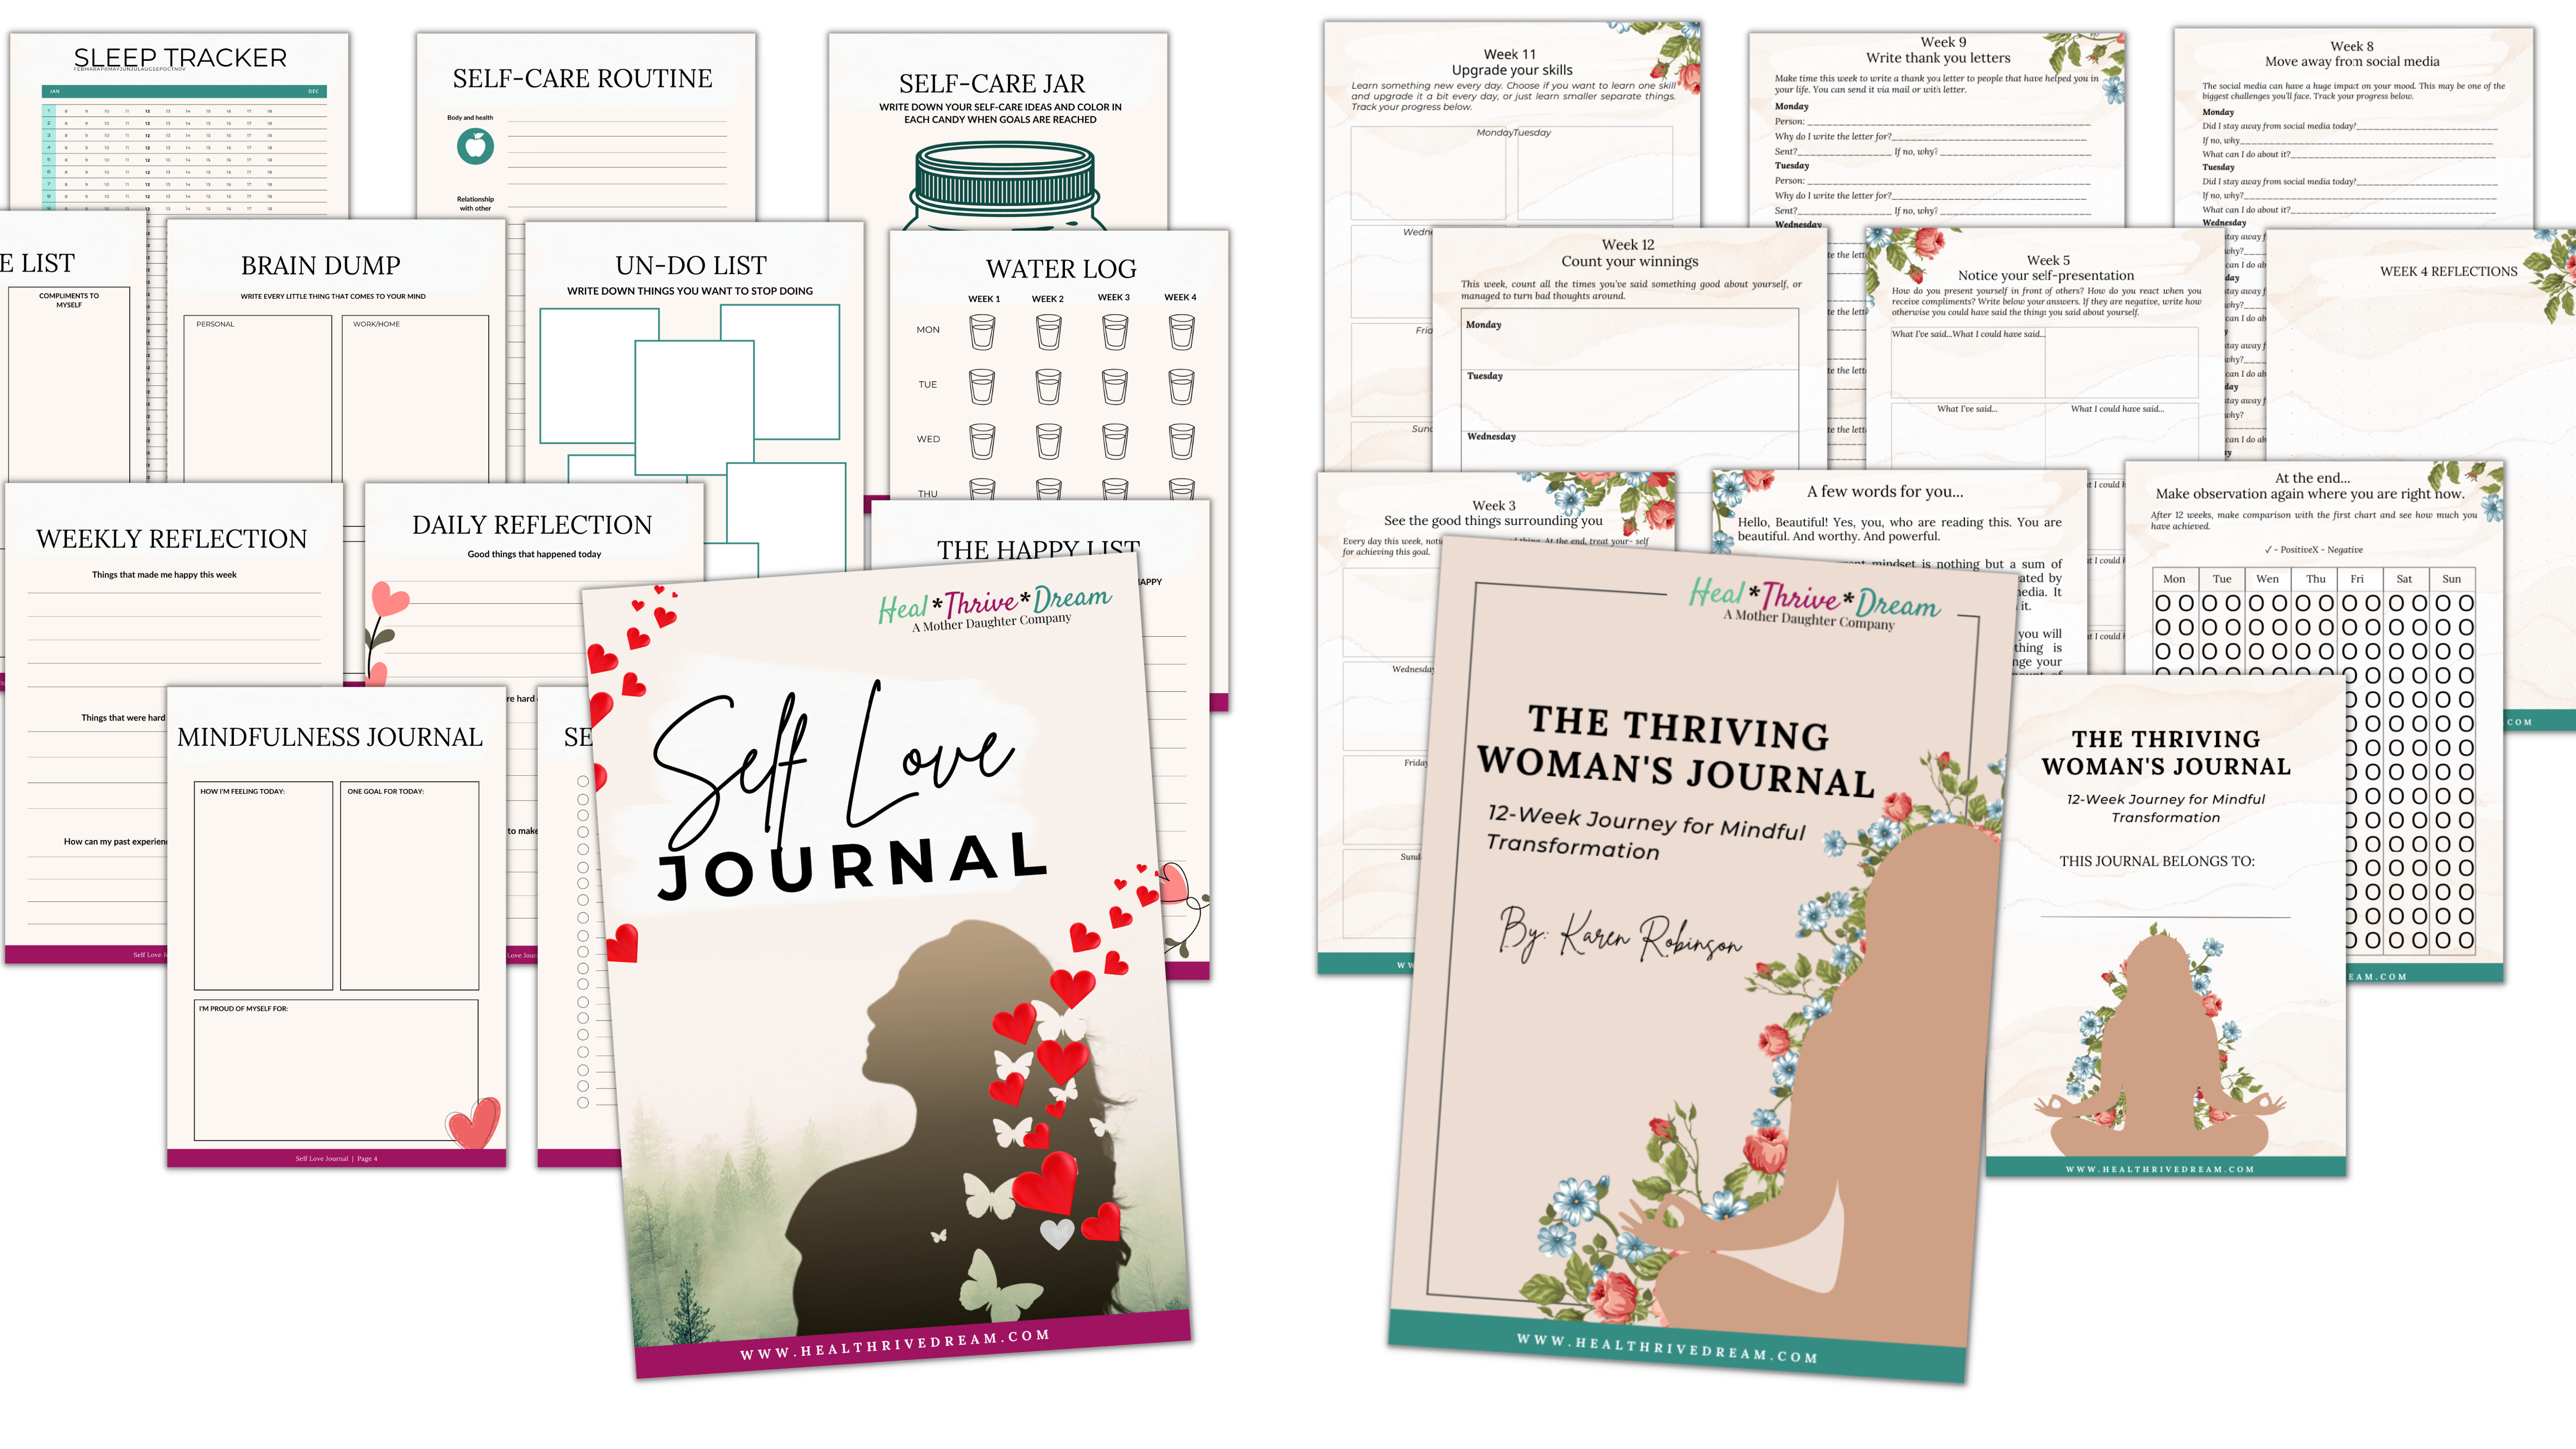 Self-Love and The Thriving Woman’s Journal